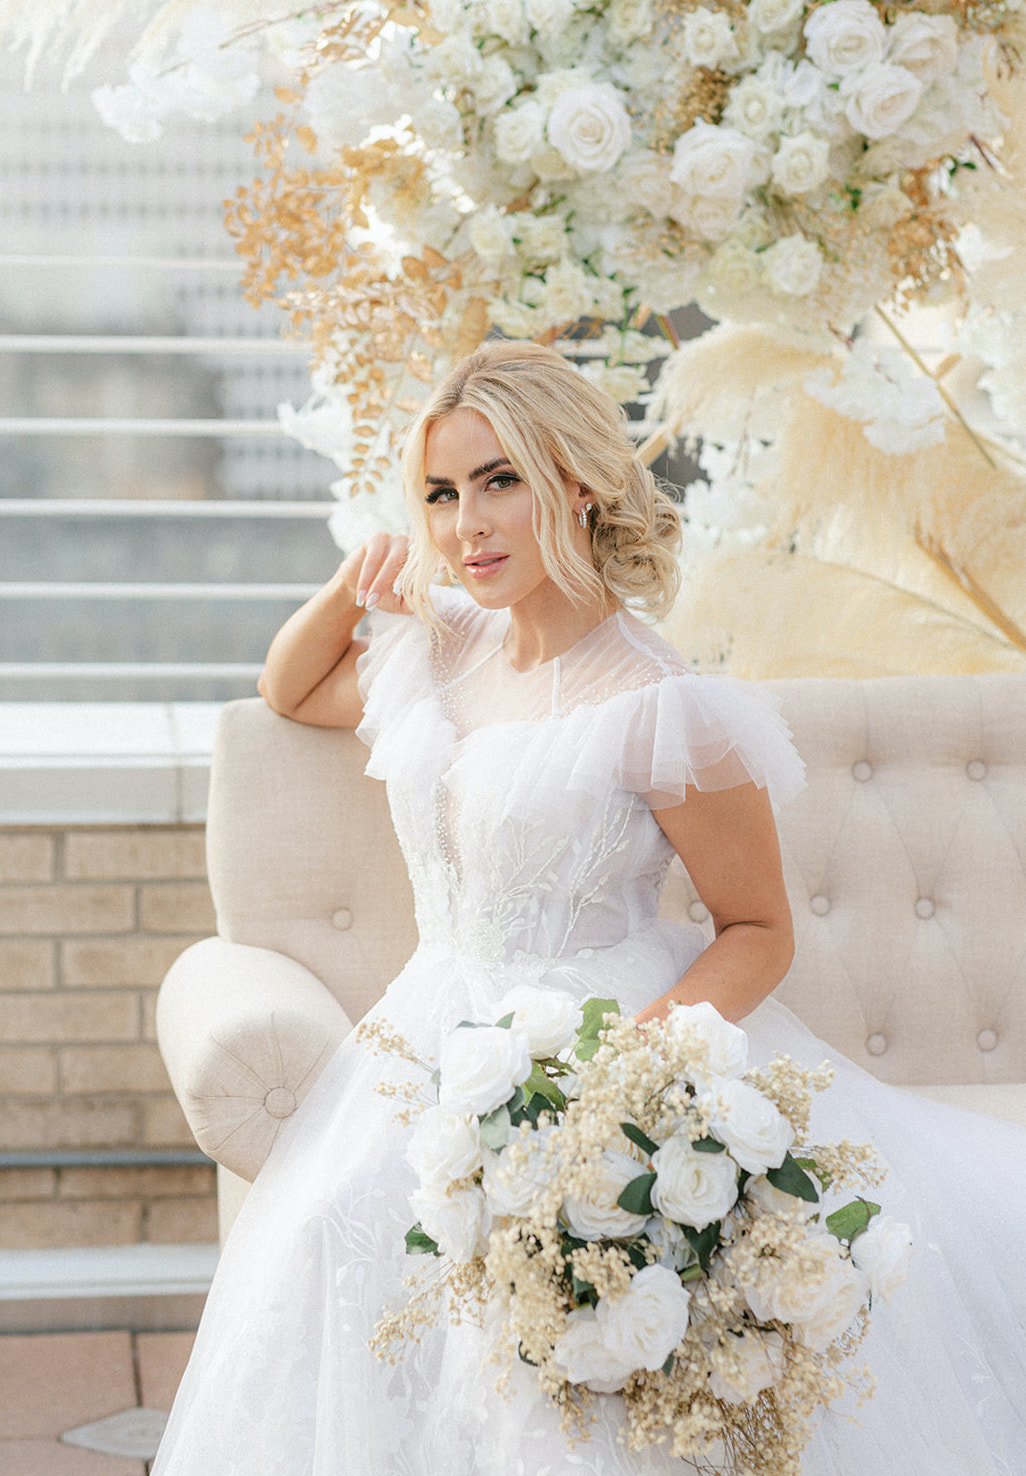 The bride poses on the beige couch, holding her white rose bridal bouquet for the ethereal rooftop wedding styled shoot.